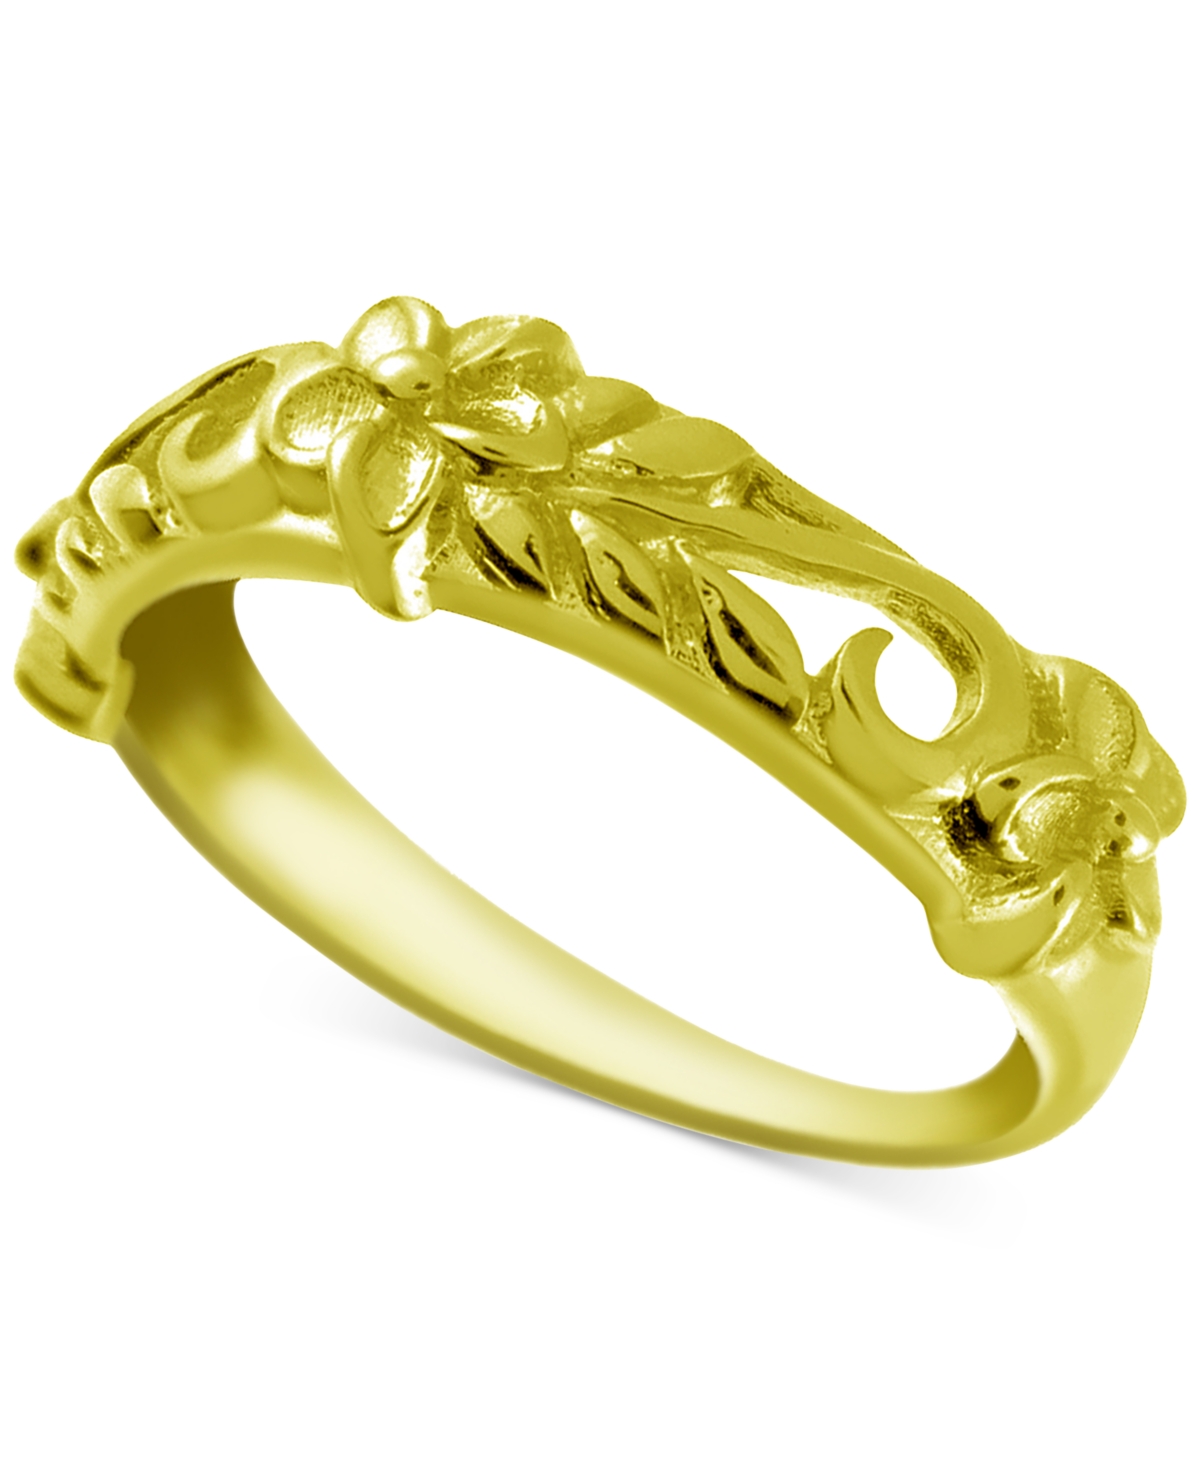 Decorative Floral Band in Gold-Plate - Gold